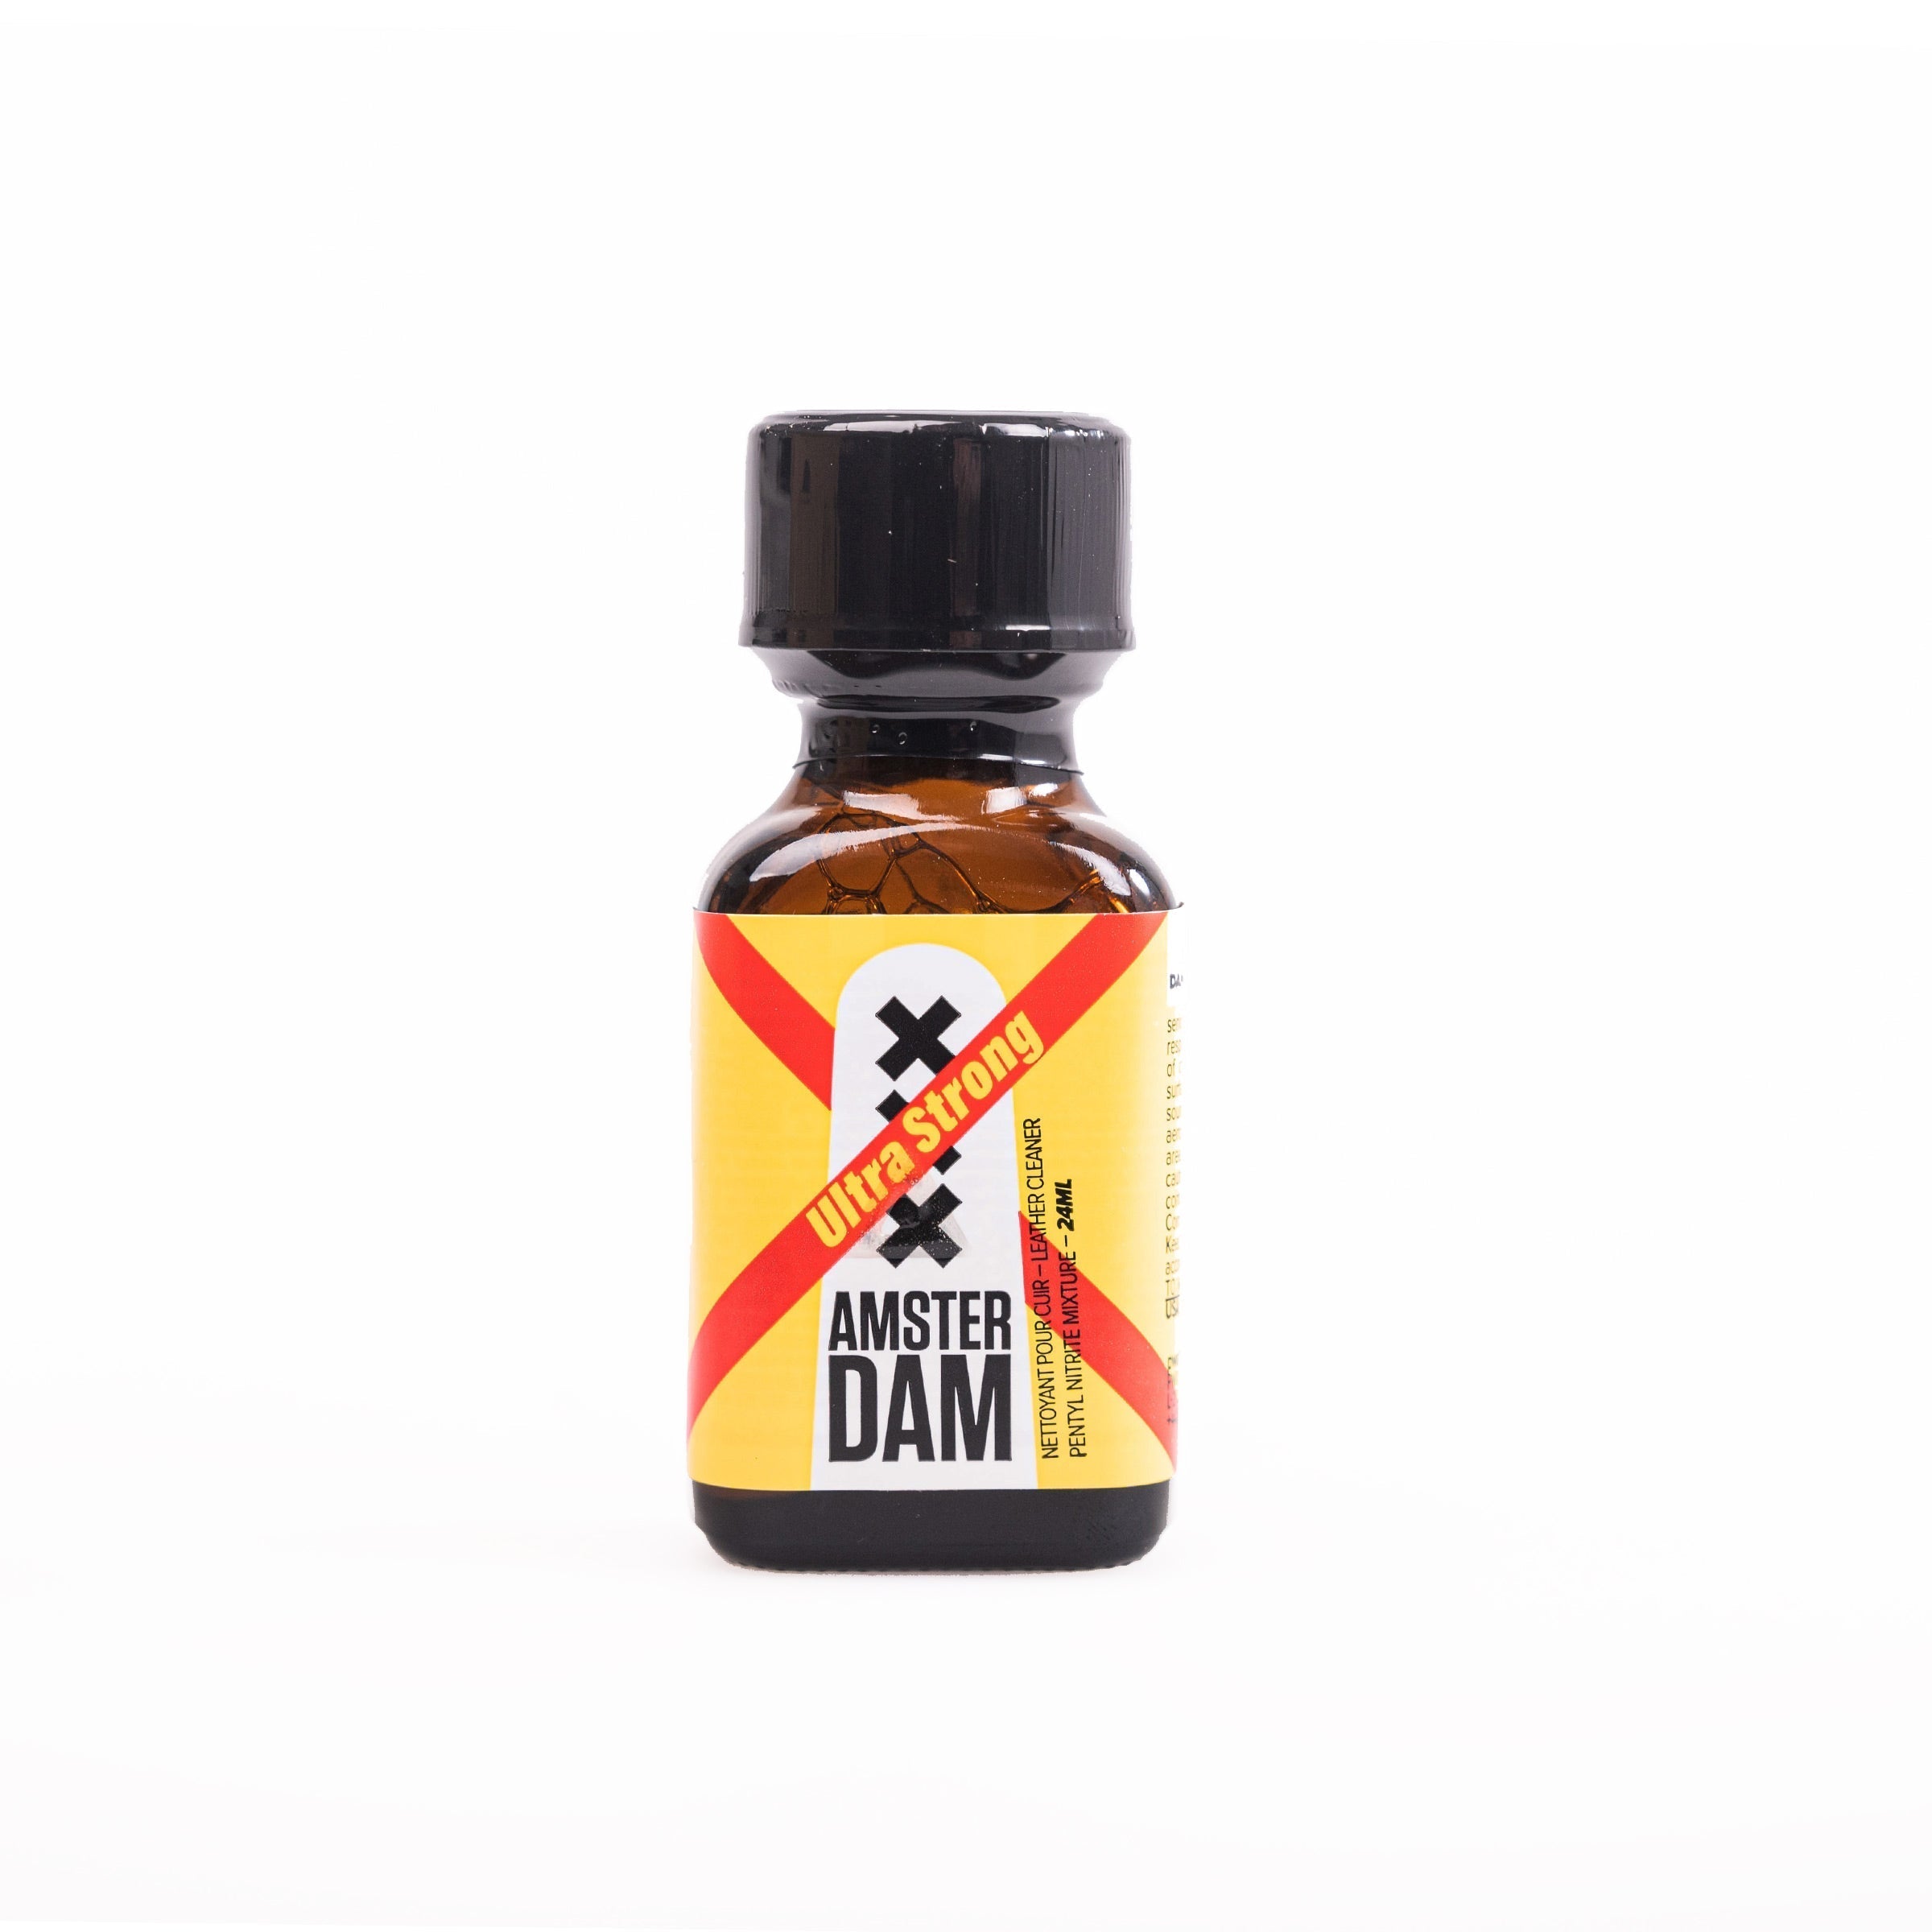 A product photograph of a bottle of Amsterdam XXX Ultra Strong Pentyl Nitrite poppers.